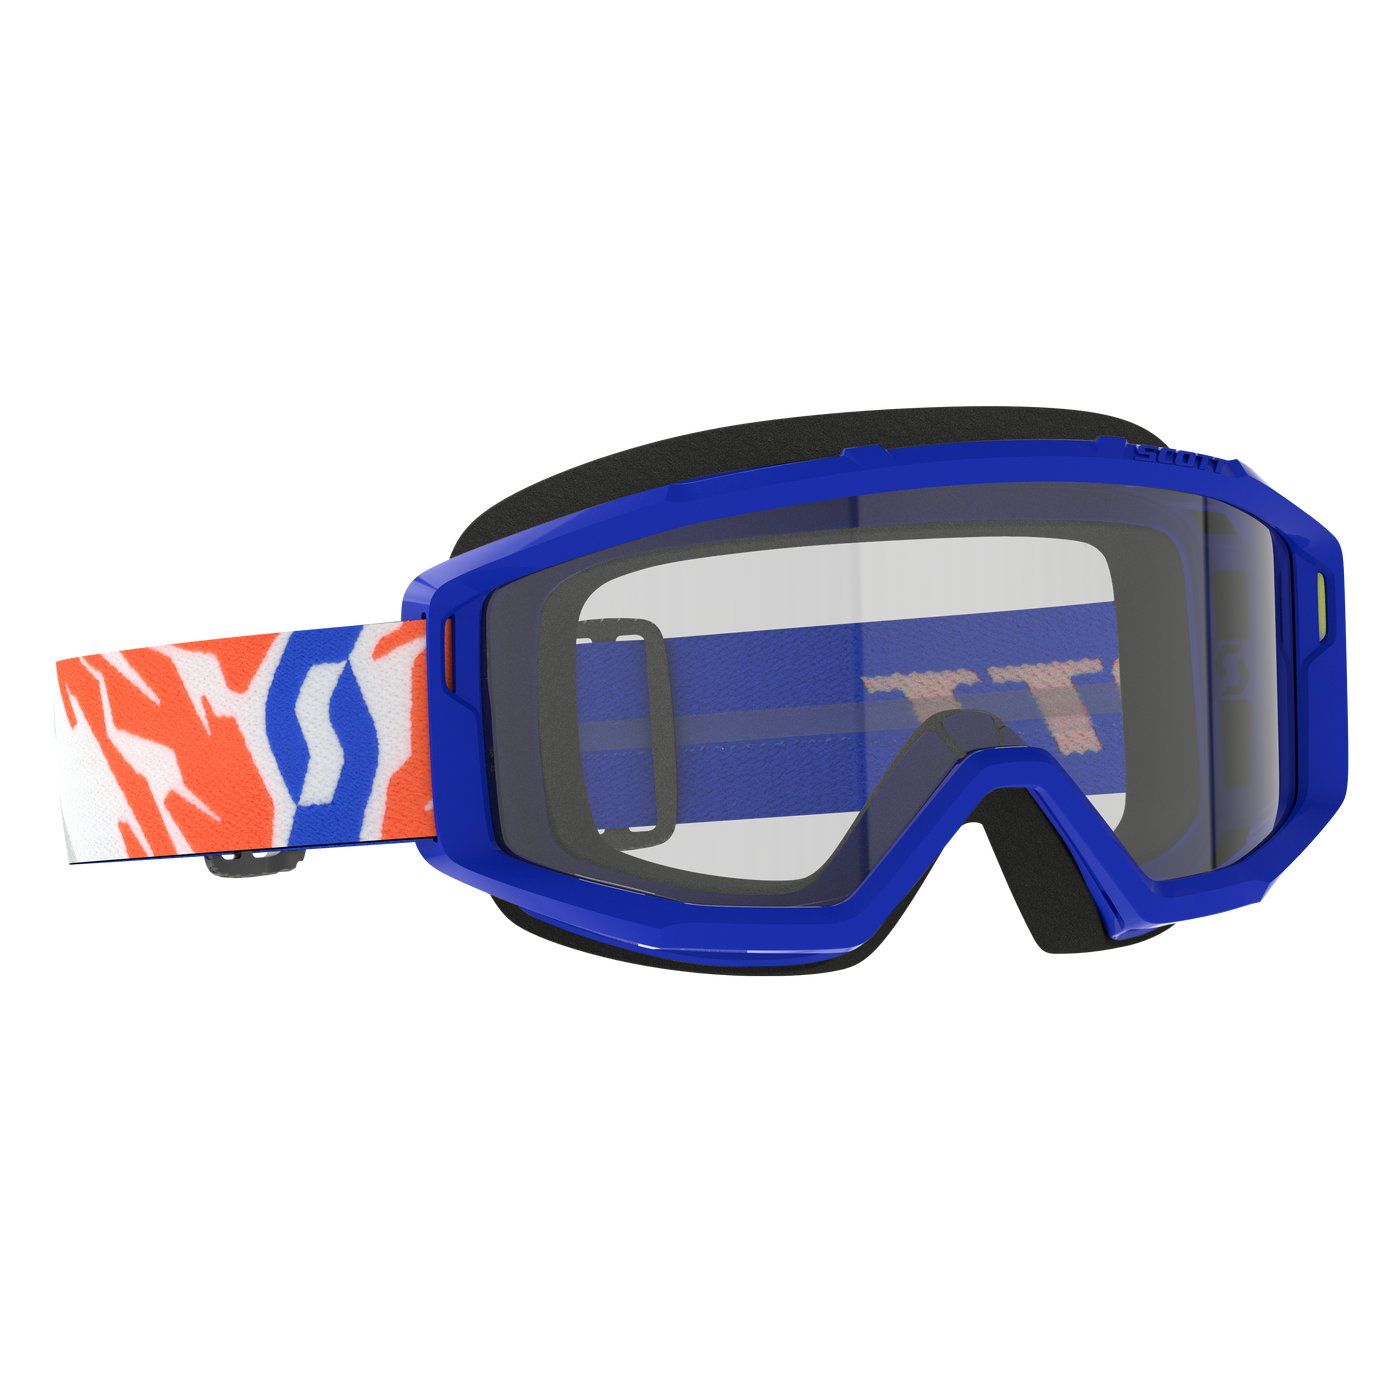 Scott Primal Youth Goggle, Blue – Clear Works Lens